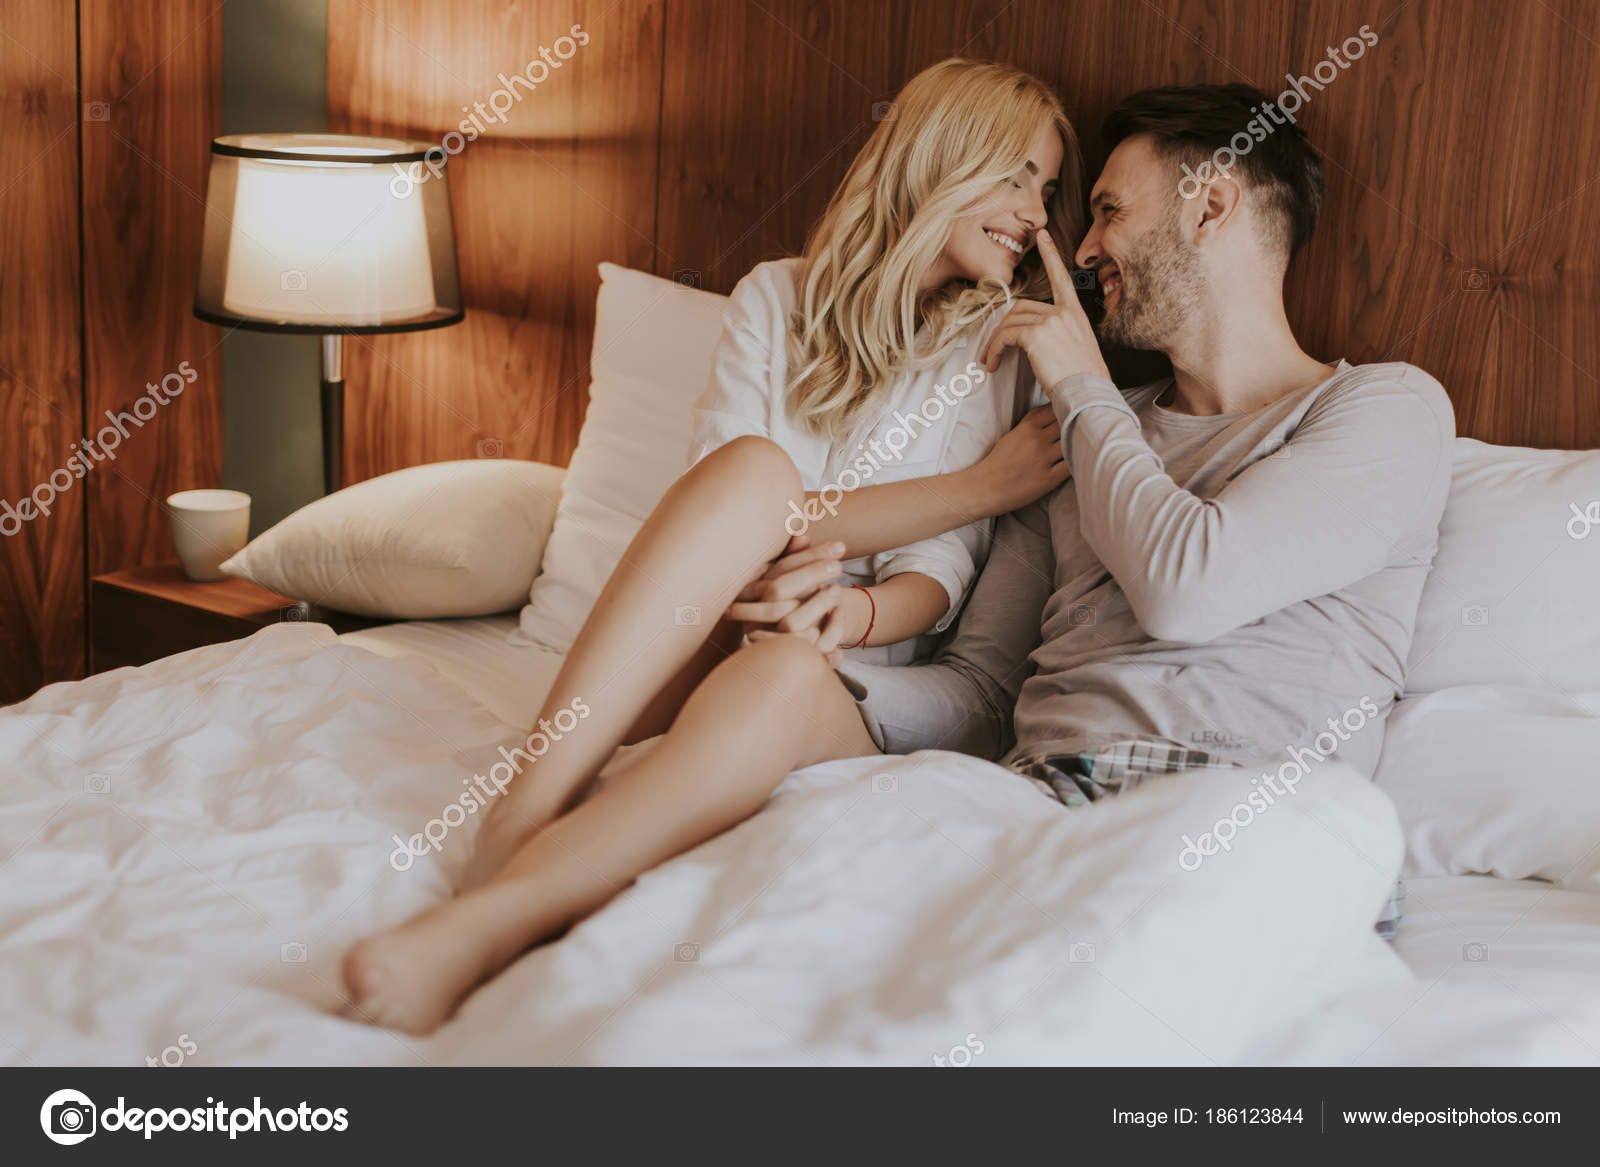 On bed love romantic What Men